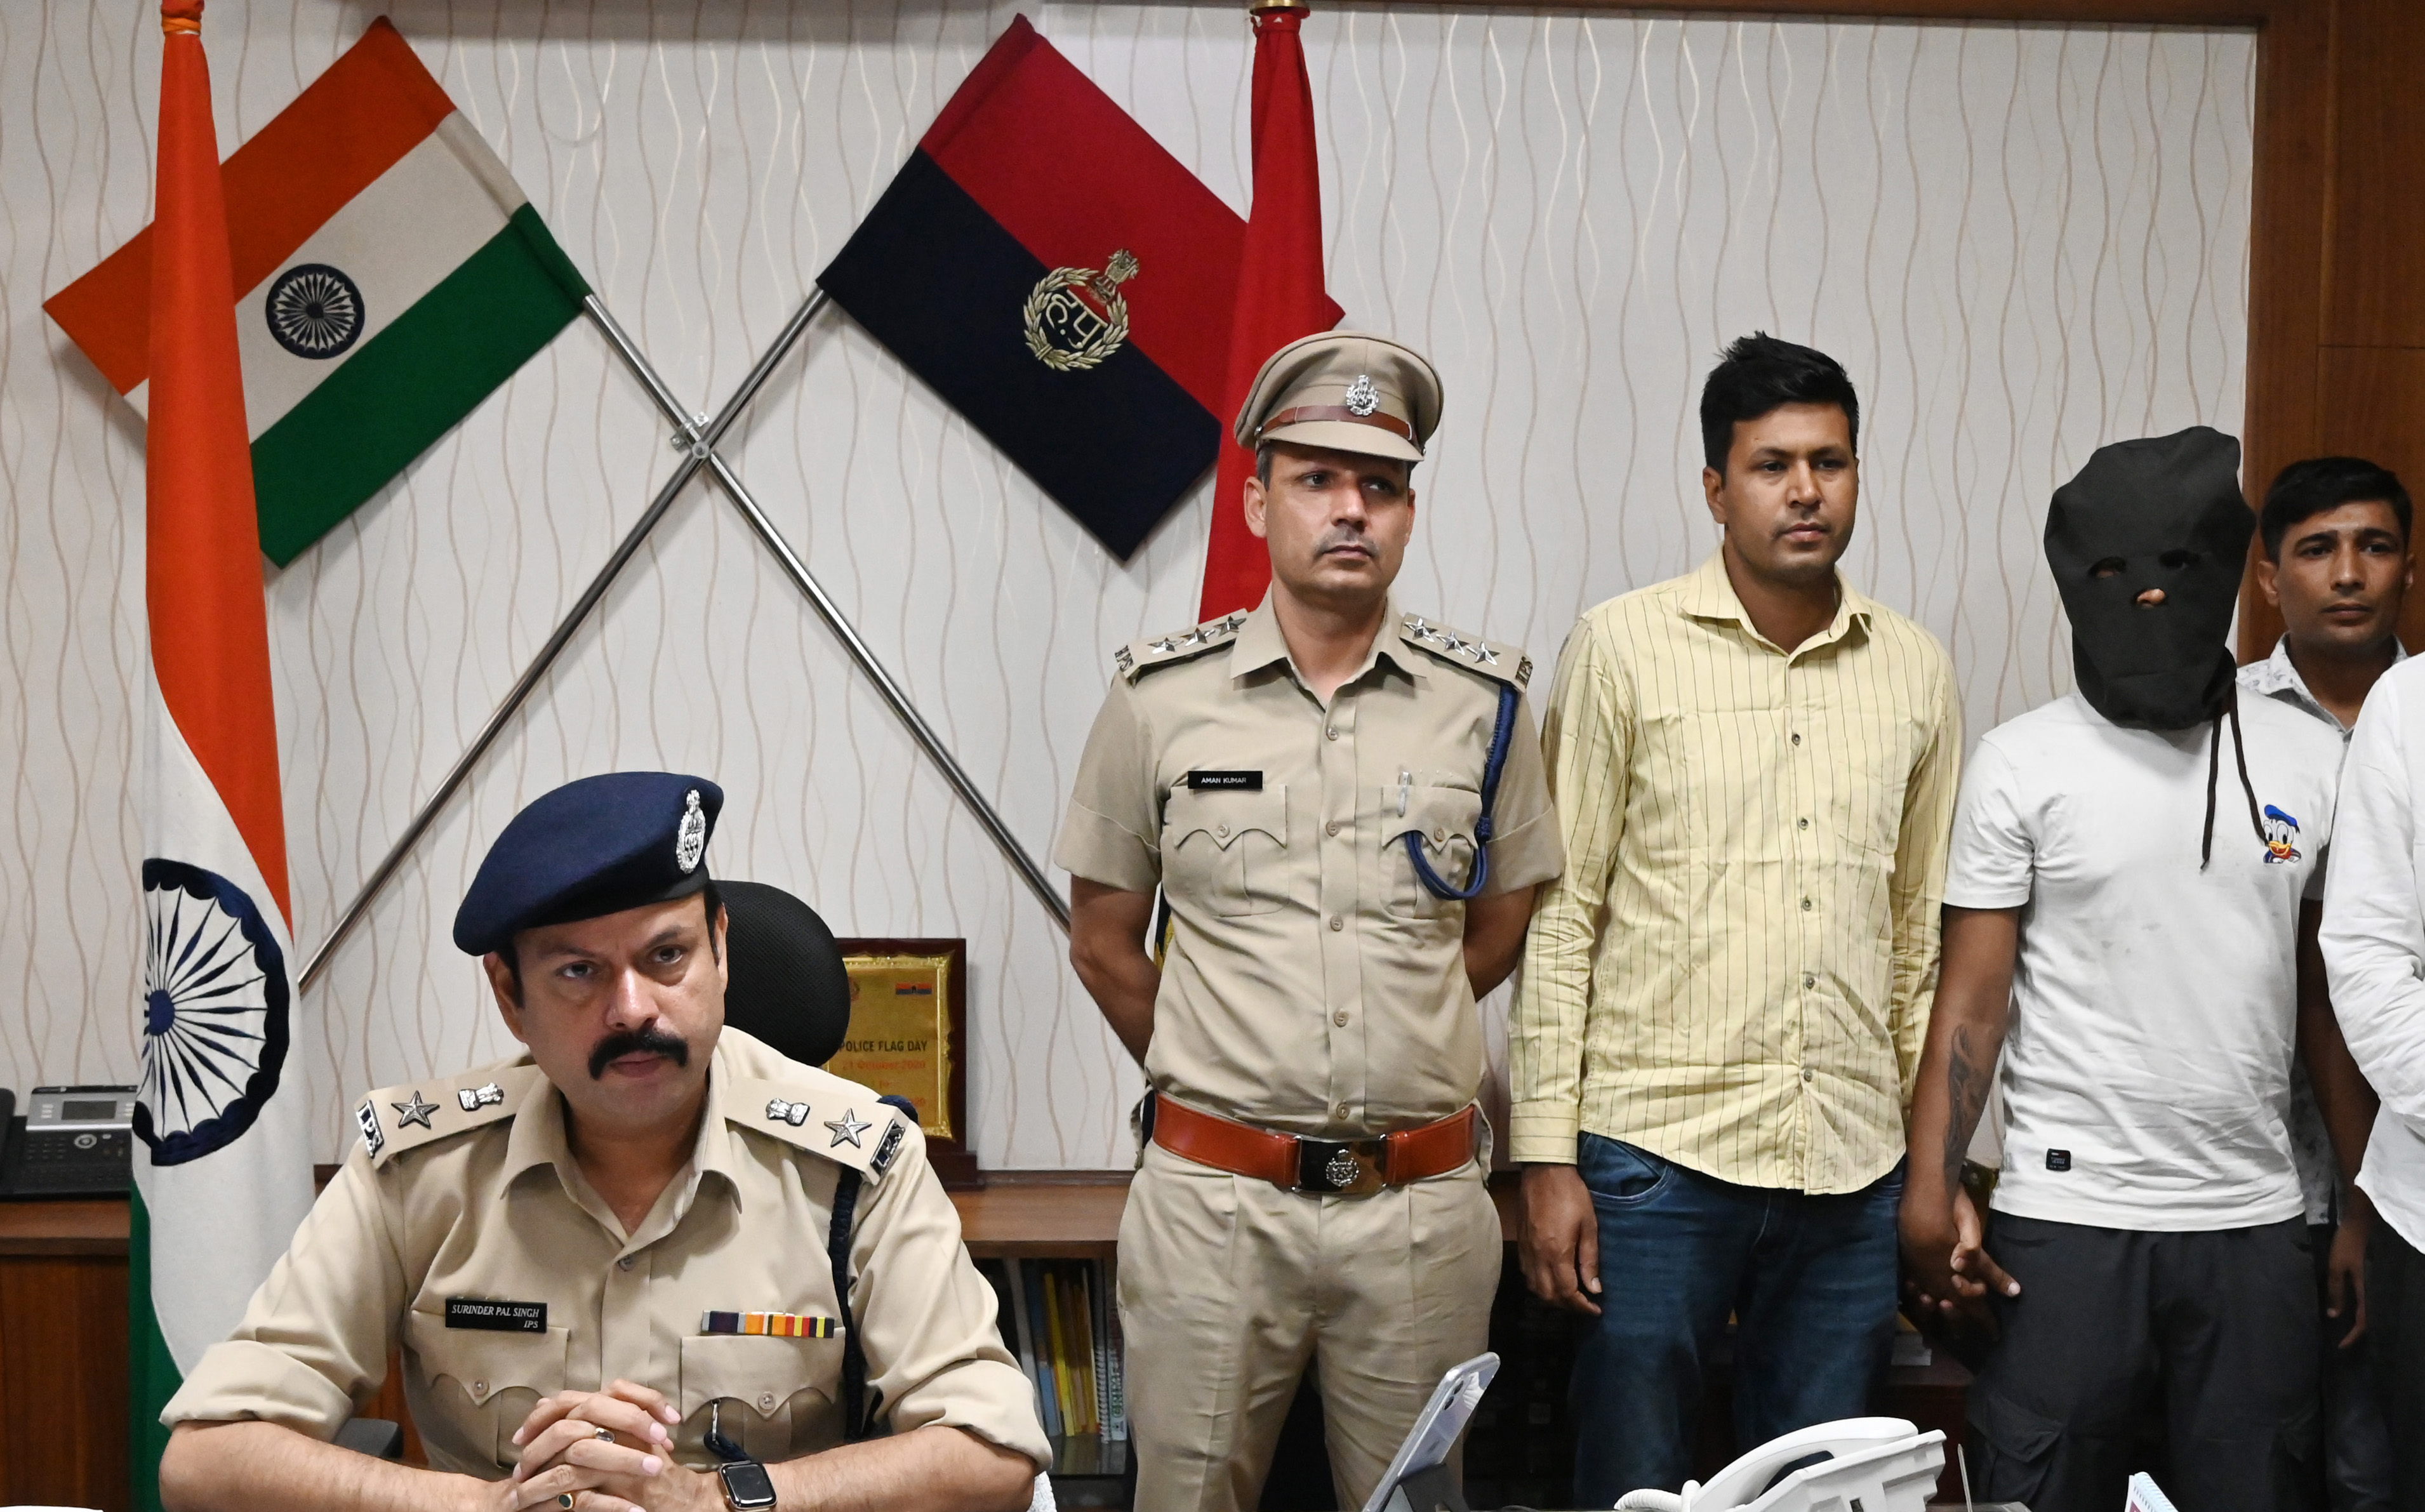 Panchkula Police arrest murder convict out on parole with two country-made pistols